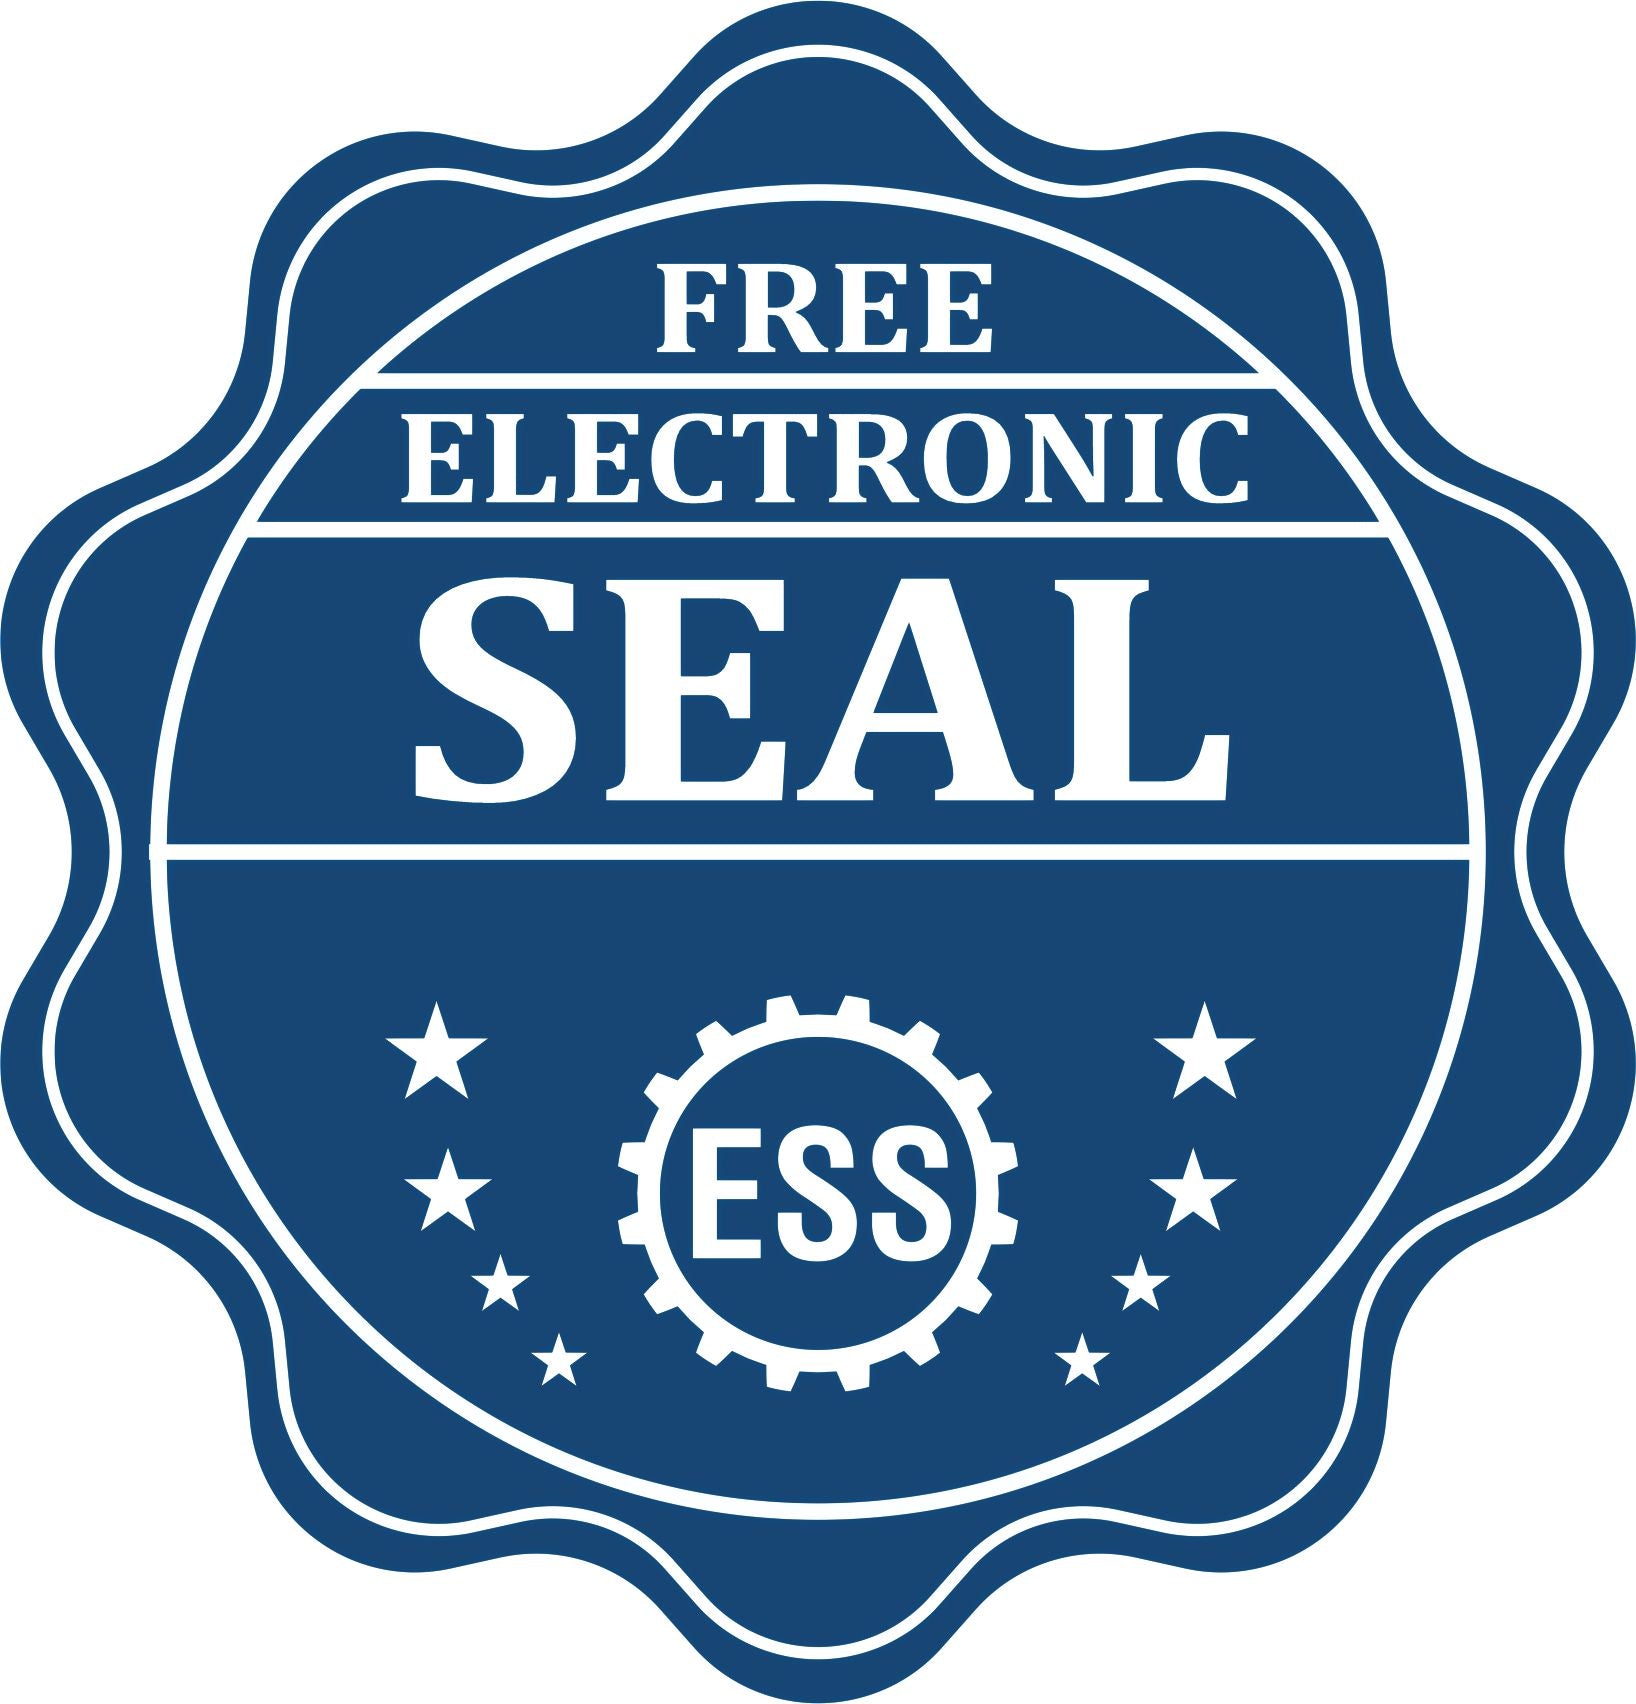 A badge showing a free electronic seal for the Long Reach District of Columbia Land Surveyor Seal with stars and the ESS gear on the emblem.